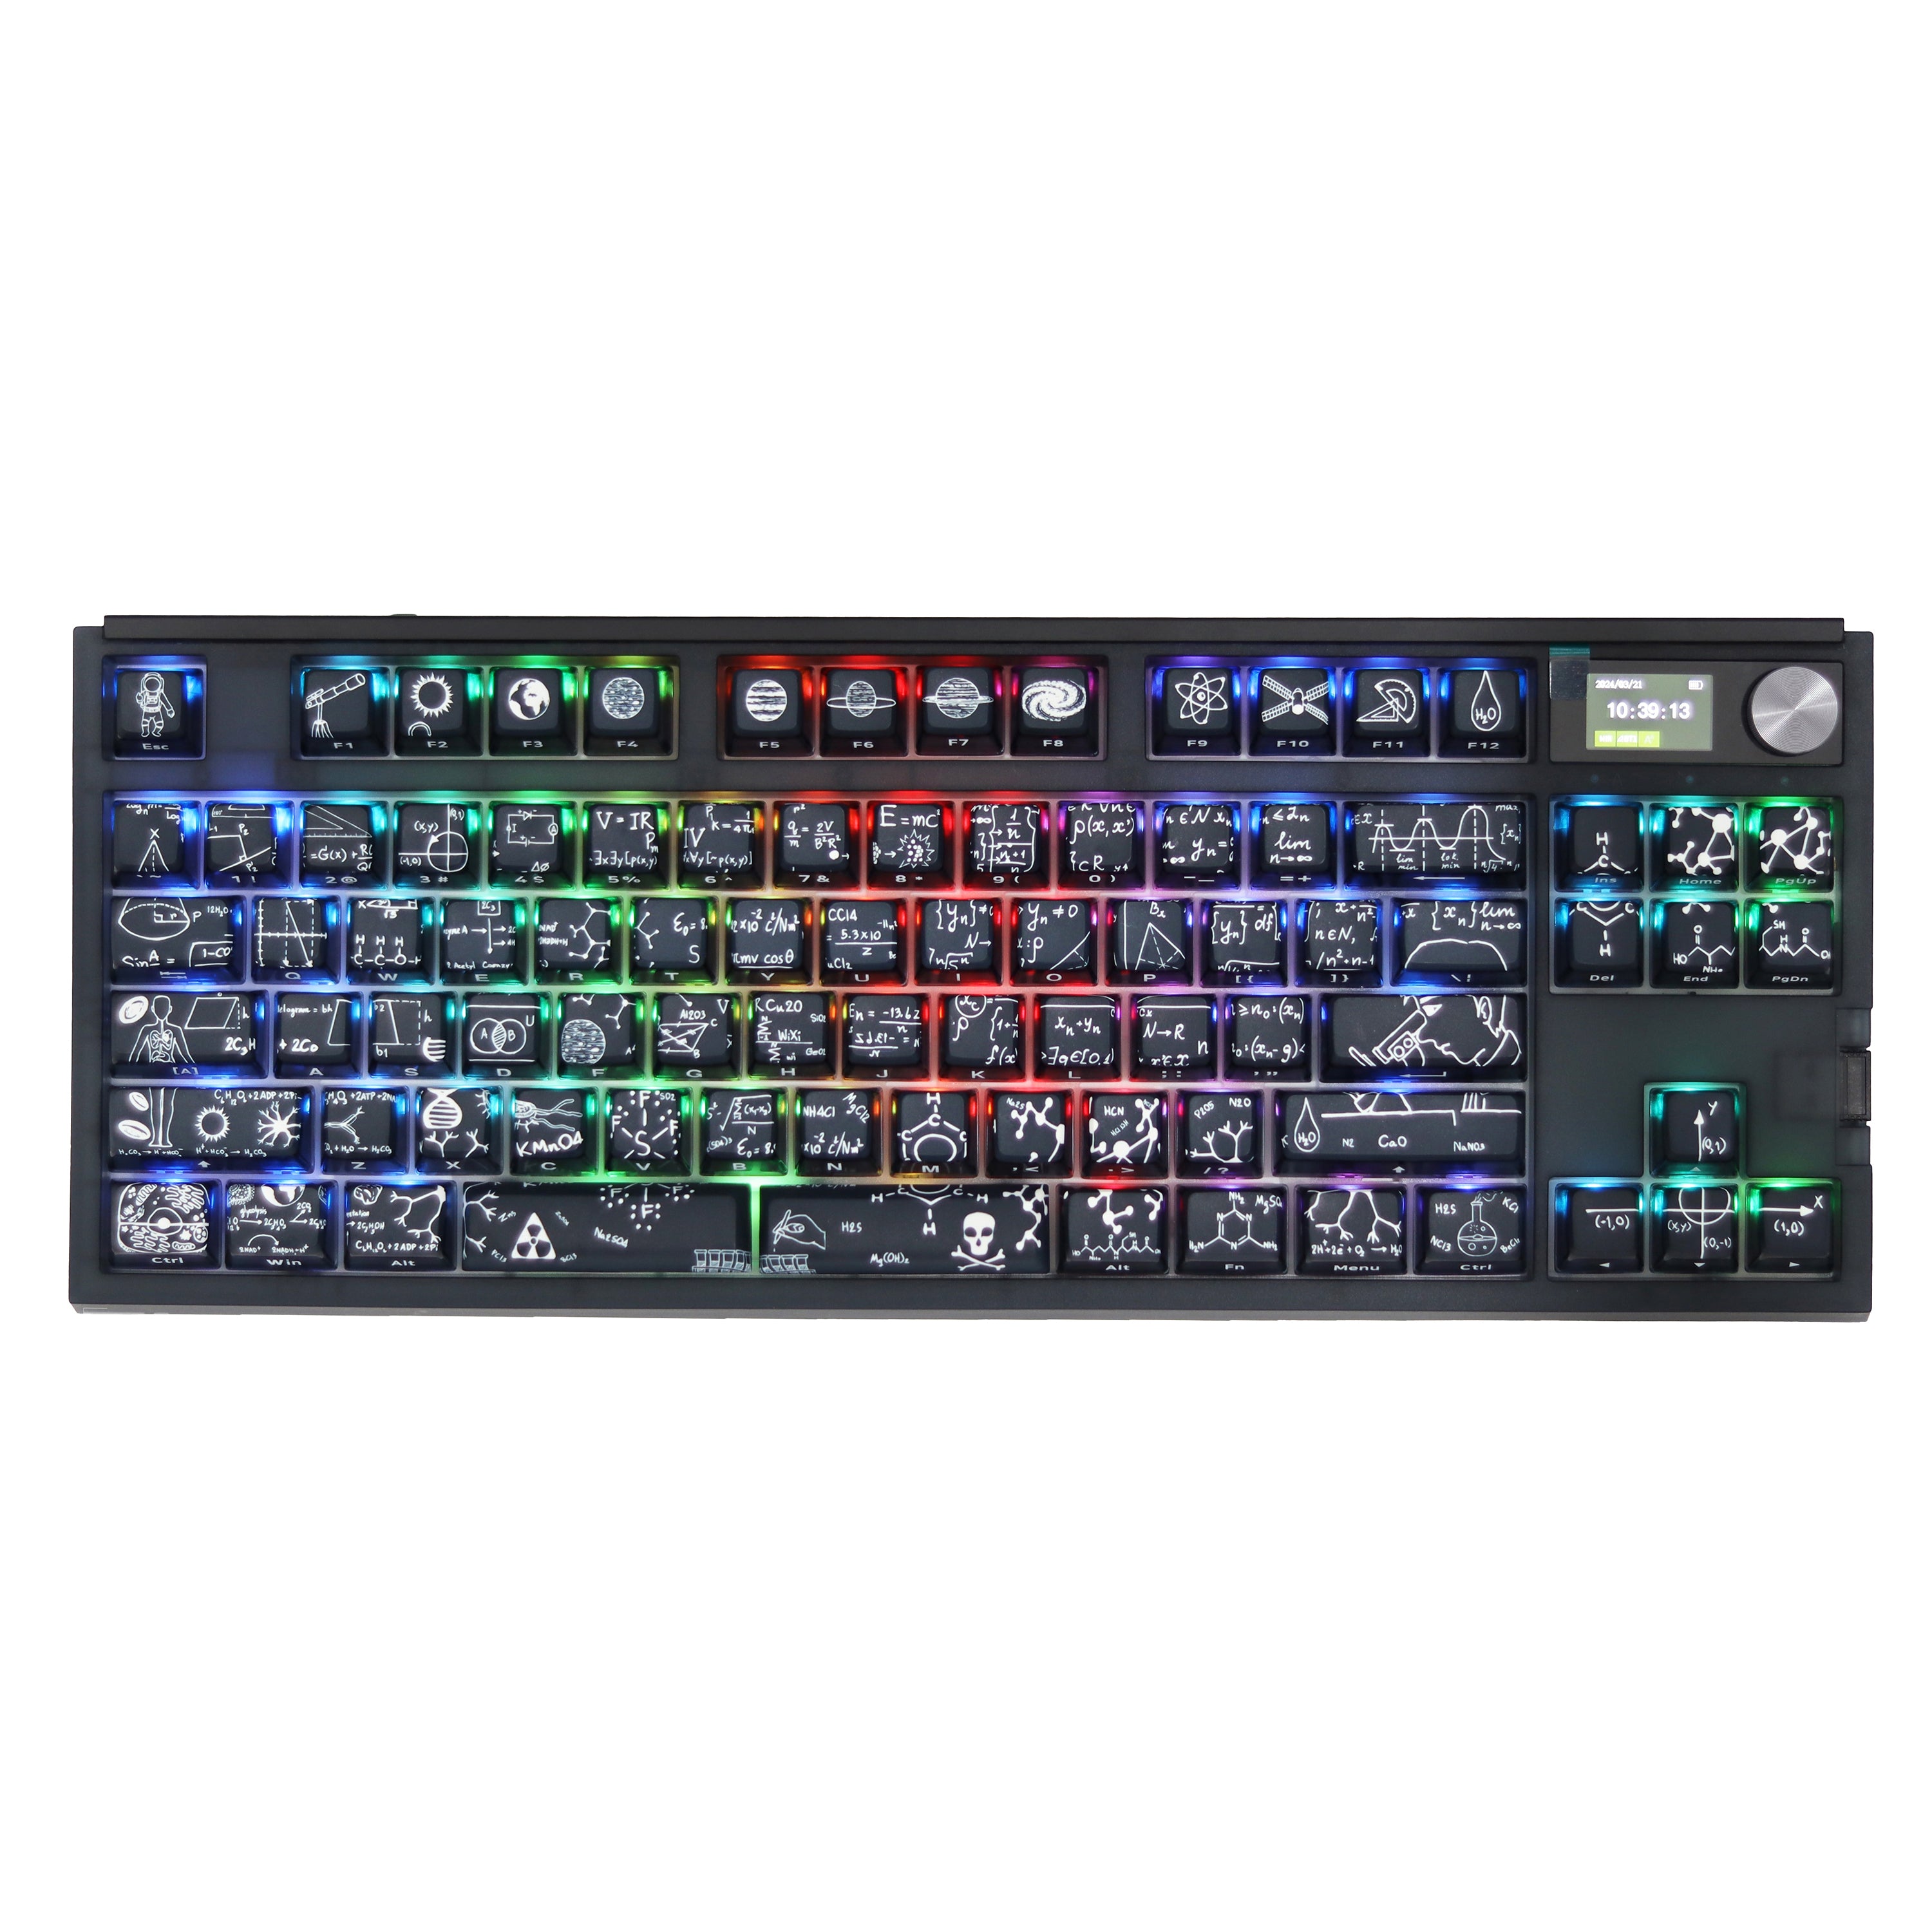 Glacier Skyloong GK87 Pro Youth Wireless/Wired Mechanical Keyboard-Scientist-